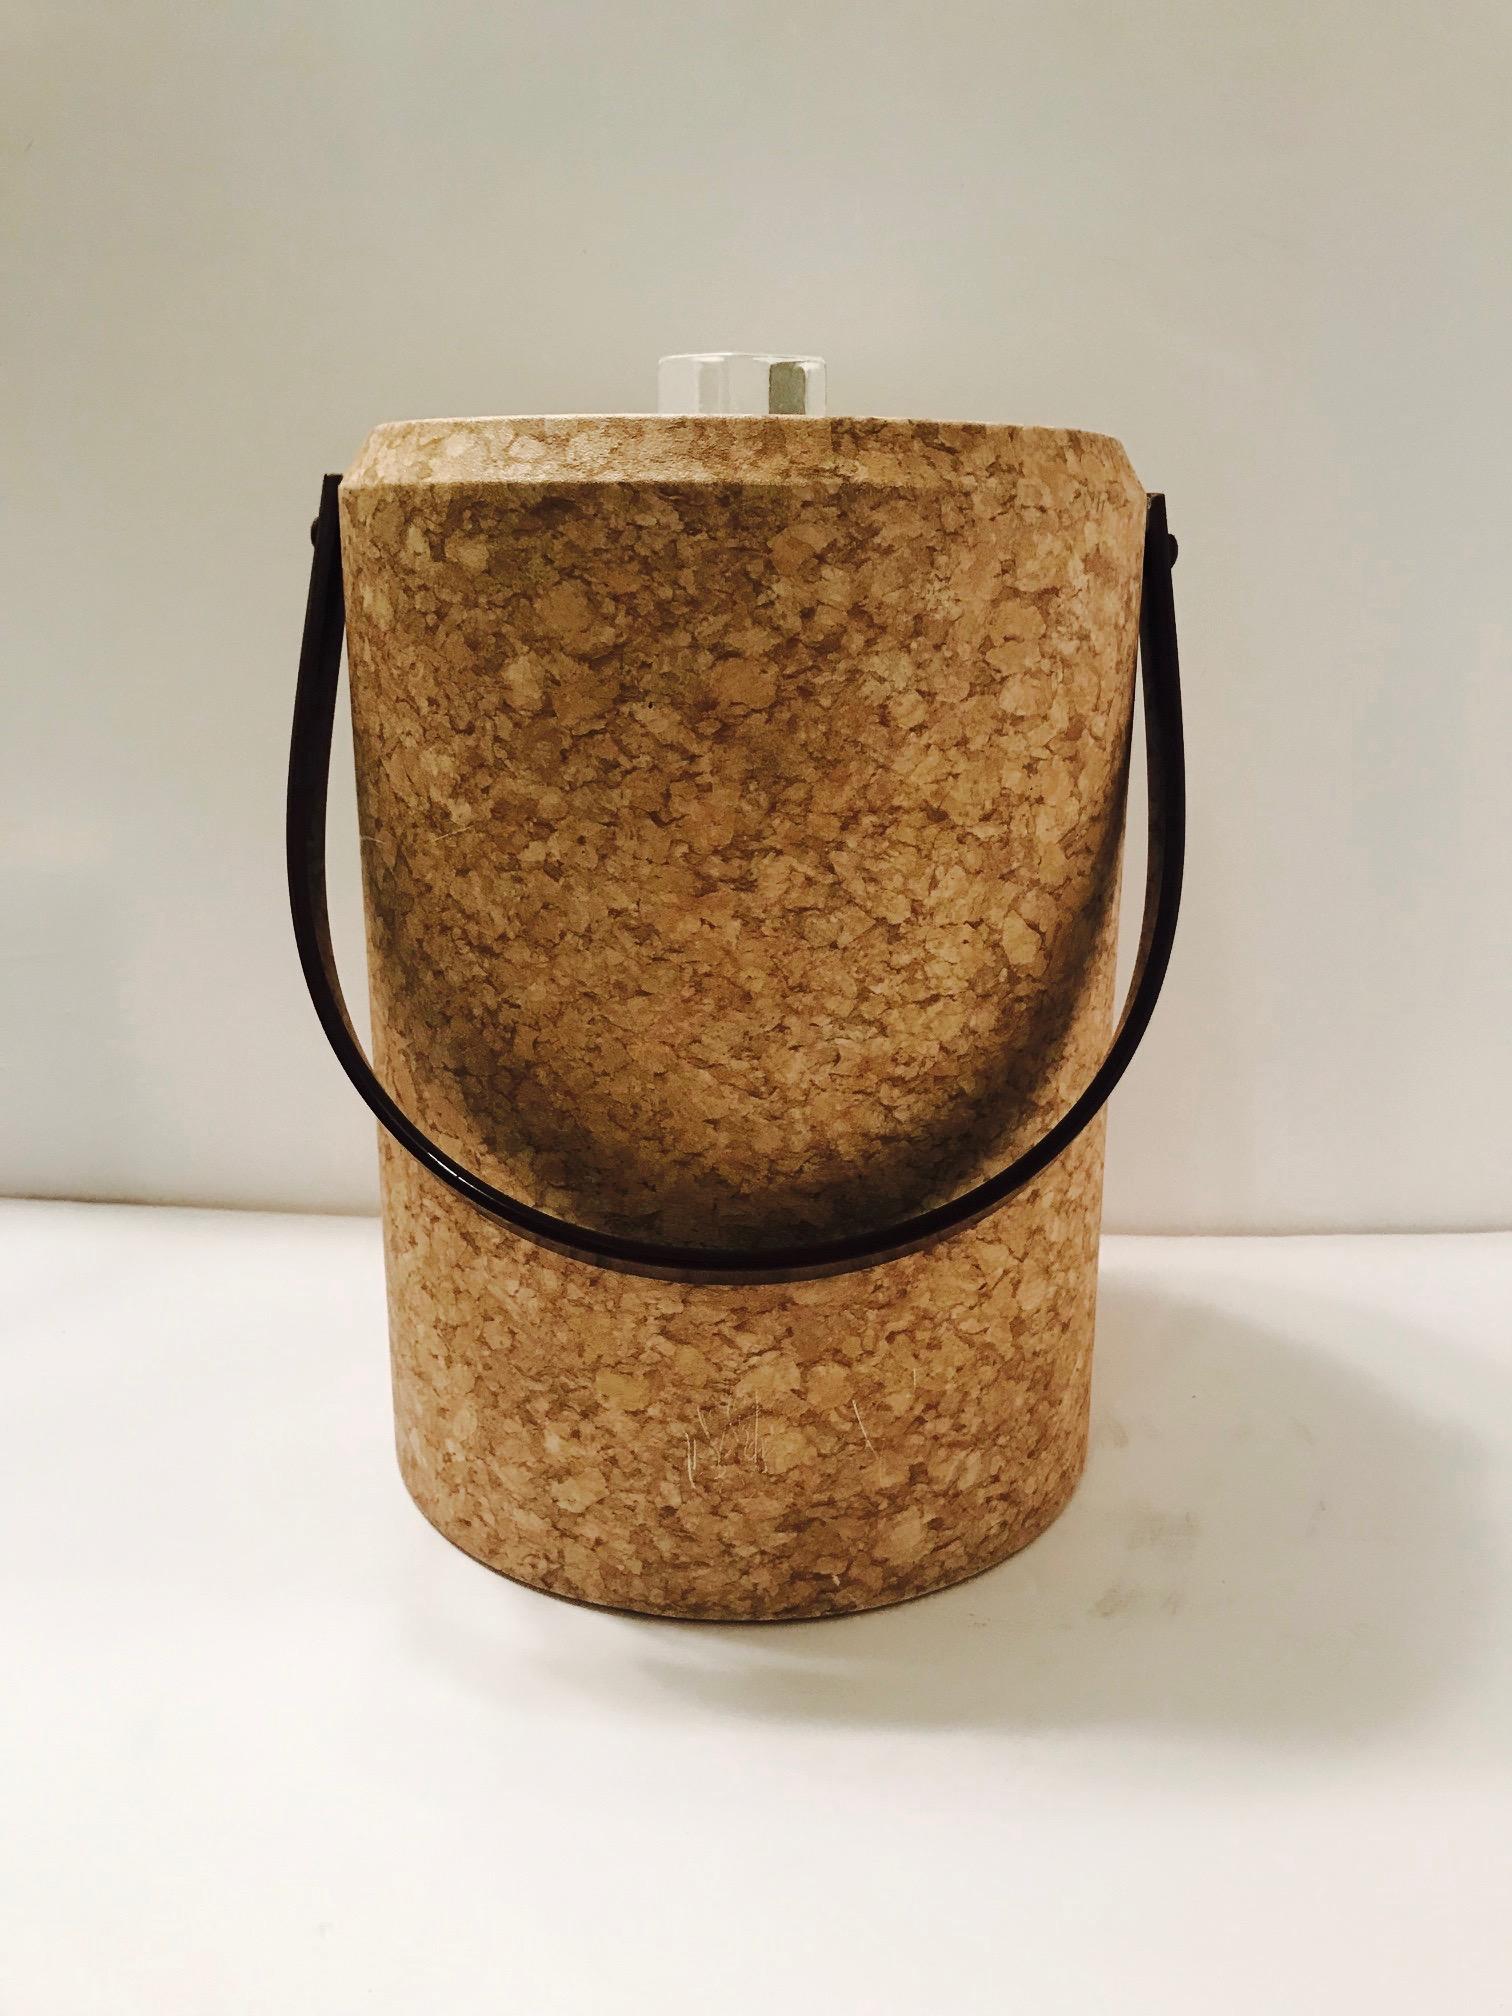 Chic 1970s acrylic ice bucket wrapped in cork design waterproof laminate. Tall cylinder form features a dark brown Lucite handle and clear Lucite lid fitted with stylized ice finial and a white acrylic interior. Indoor/outdoor use and easy to clean.